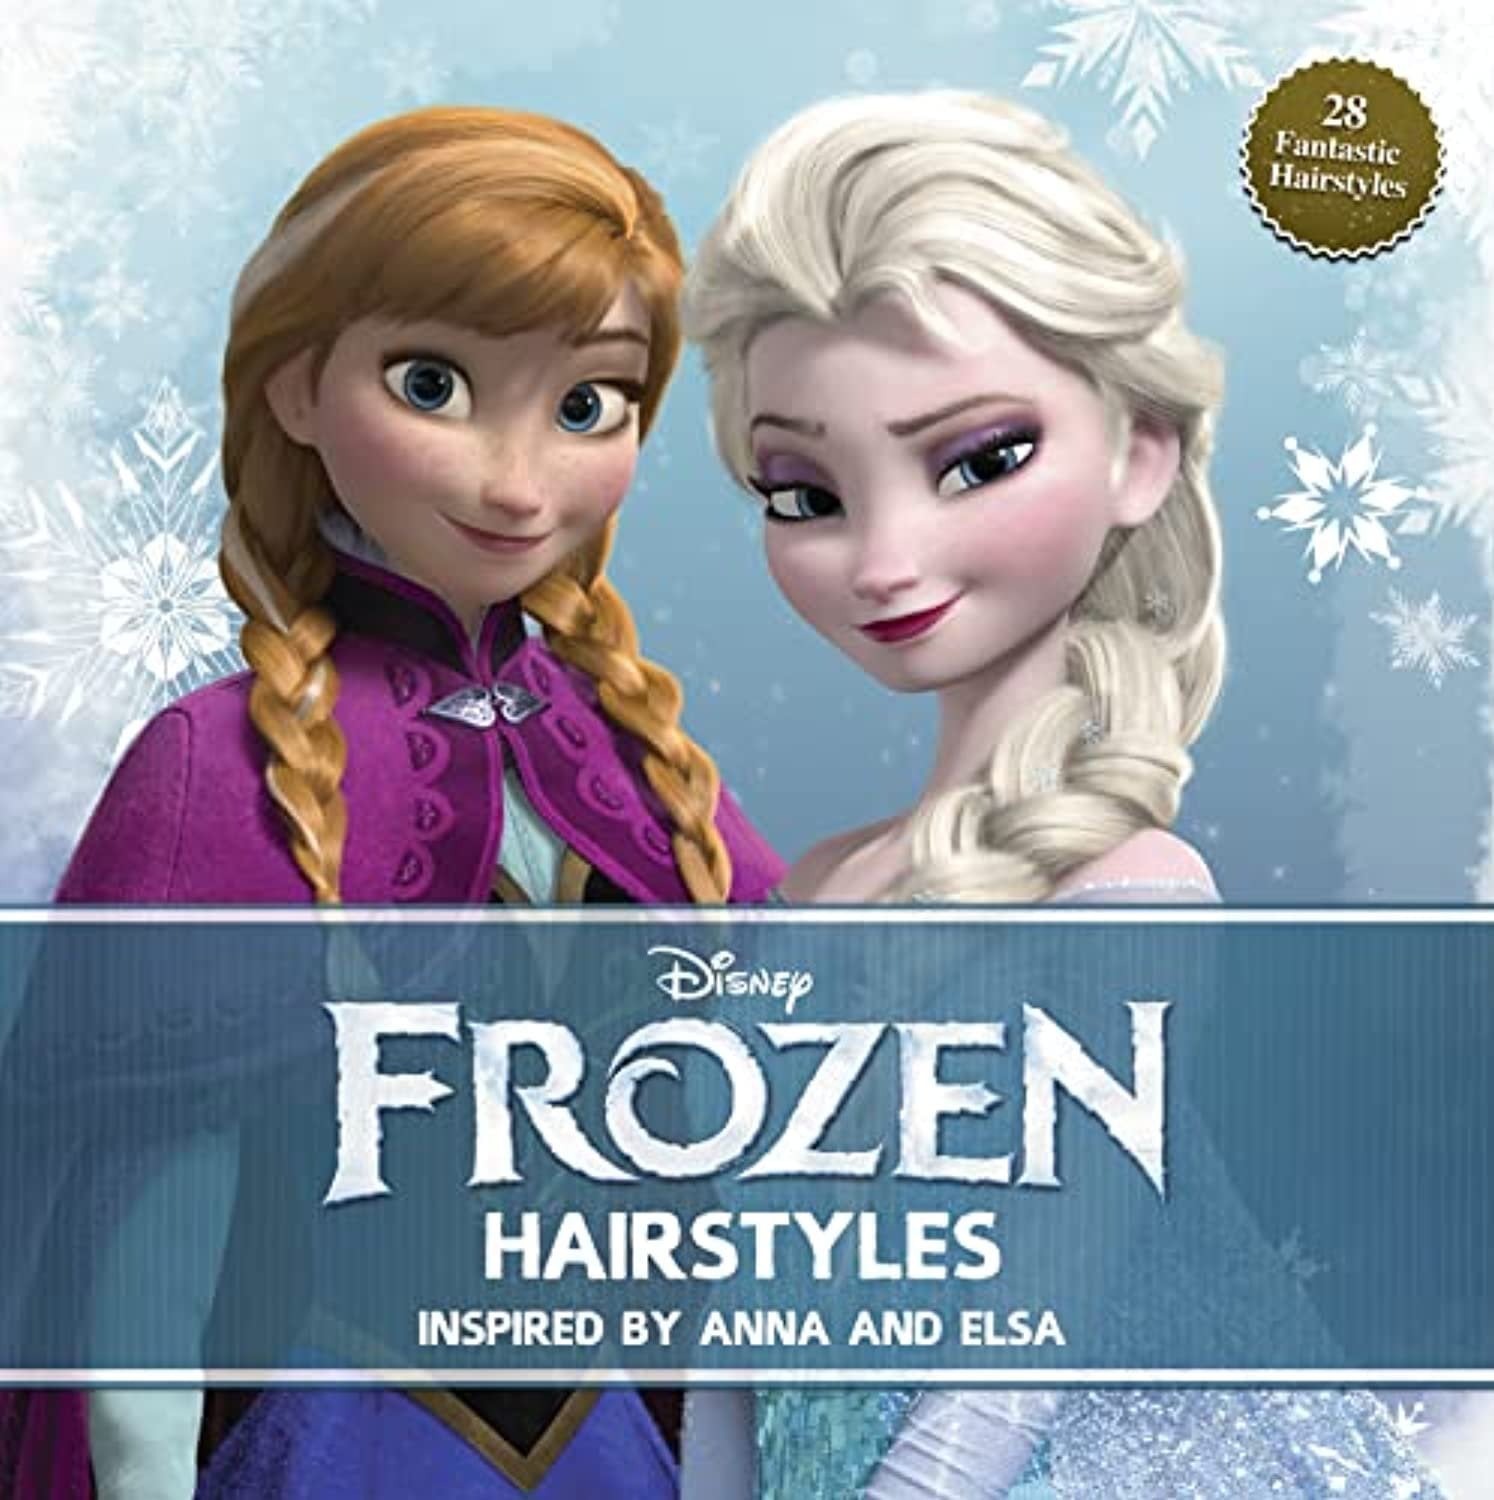 Frozen hairstyle how-to: 3 looks from the movie - Today's Parent